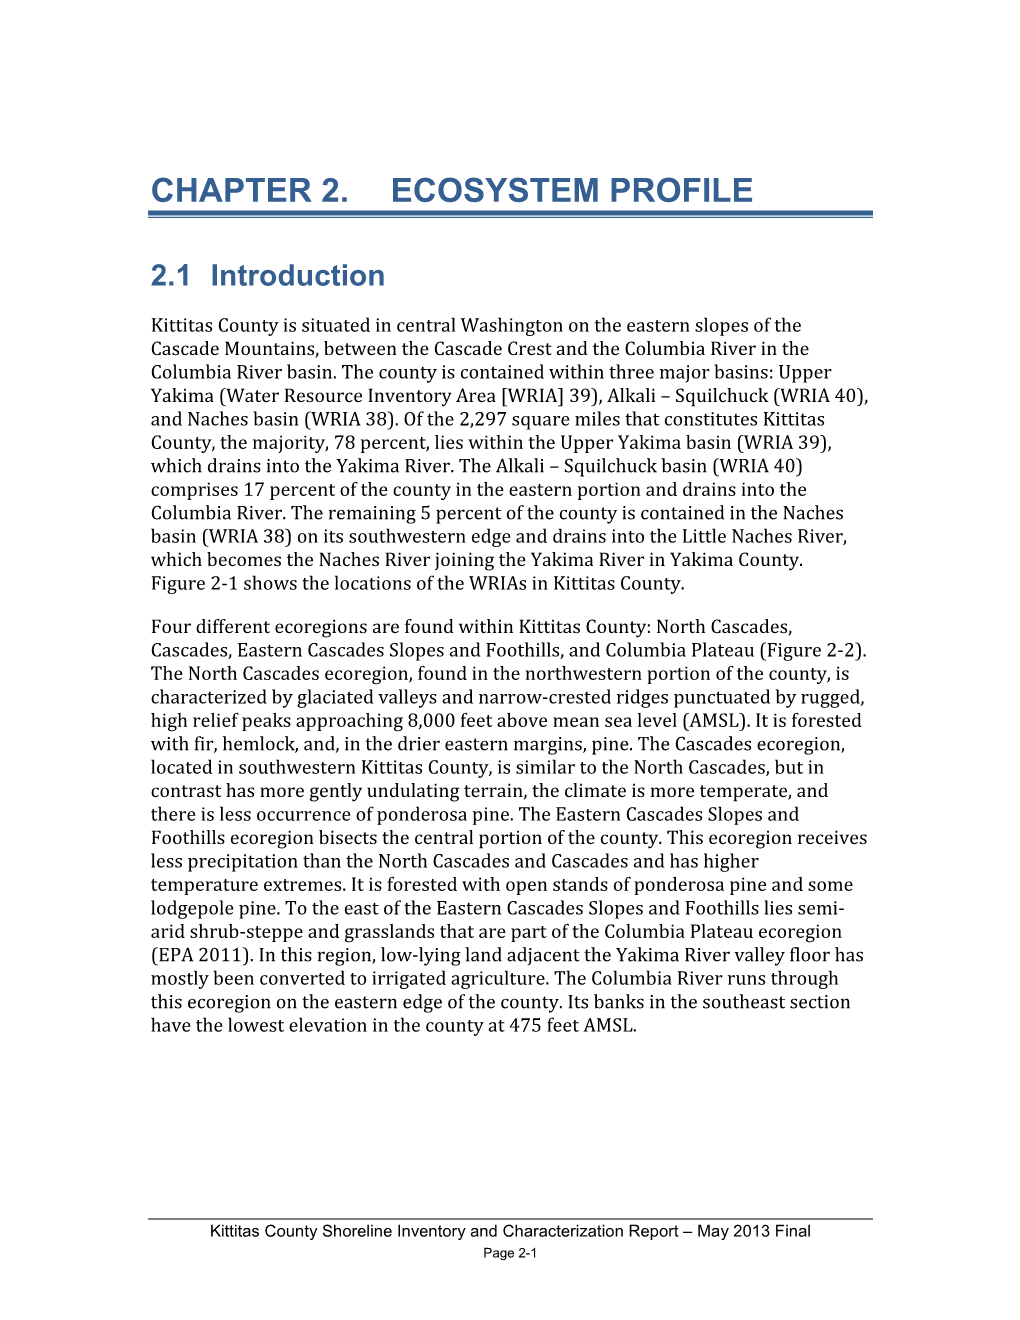 Chapter 2. Ecosystem Profile